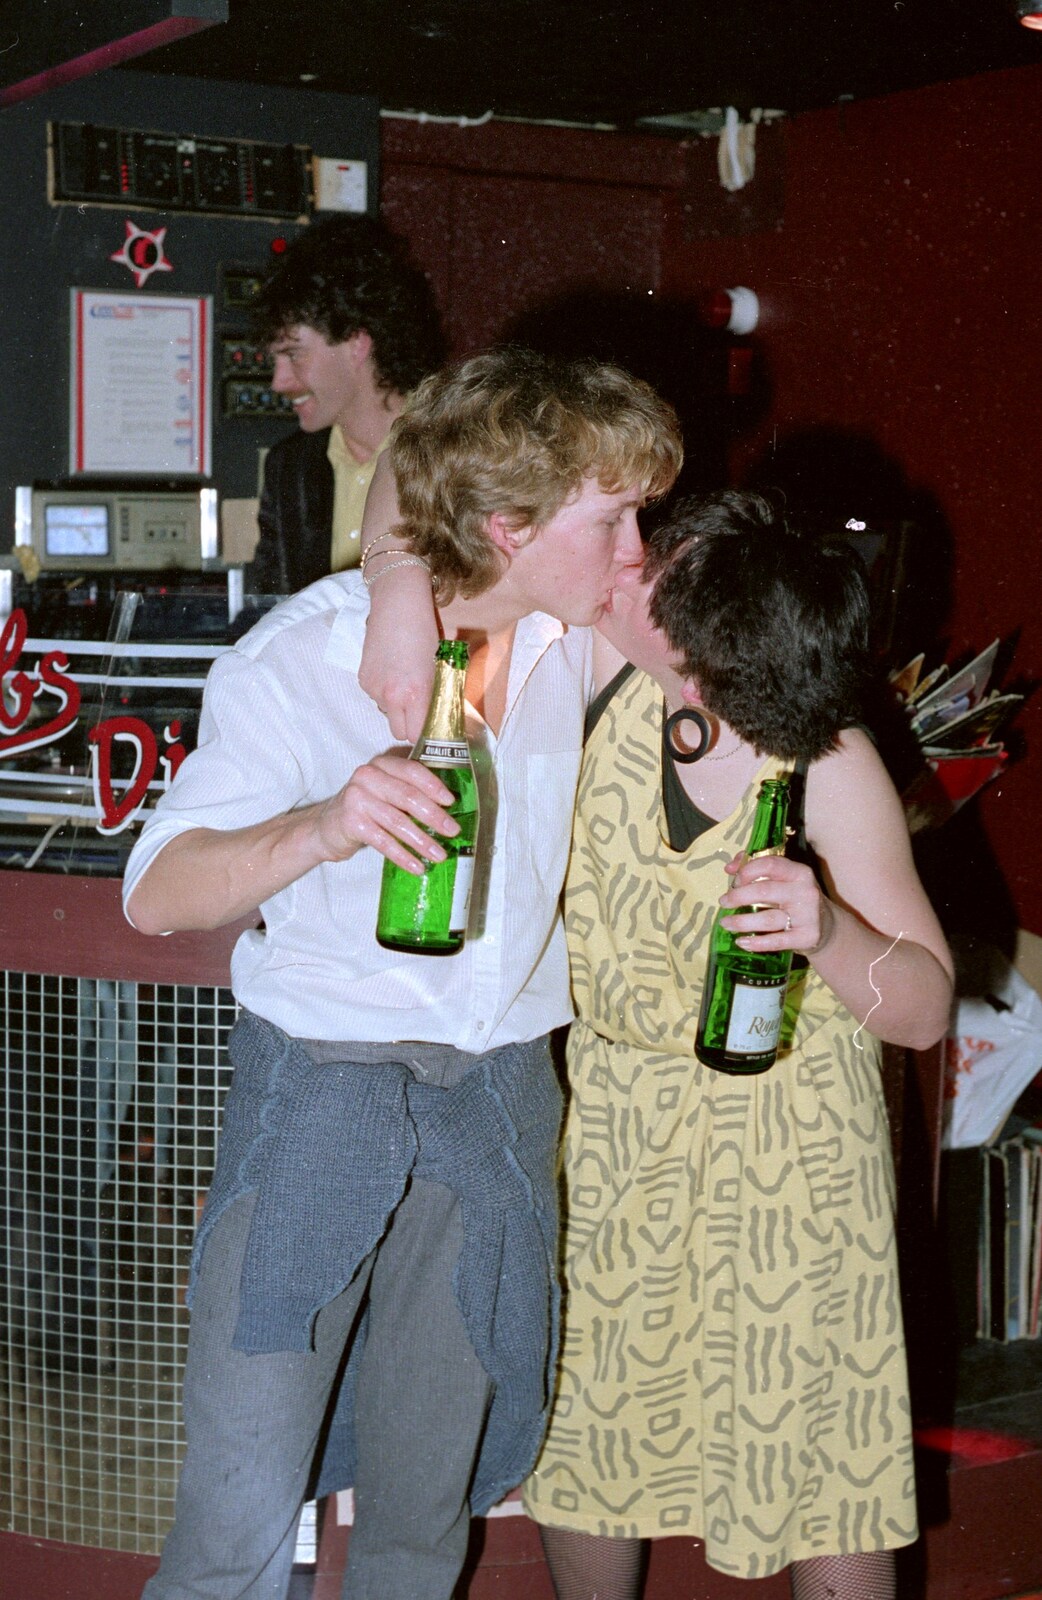 A post-fizz snog from Uni: A Party in Snobs Nightclub, Mayflower Street, Plymouth - 18th October 1986